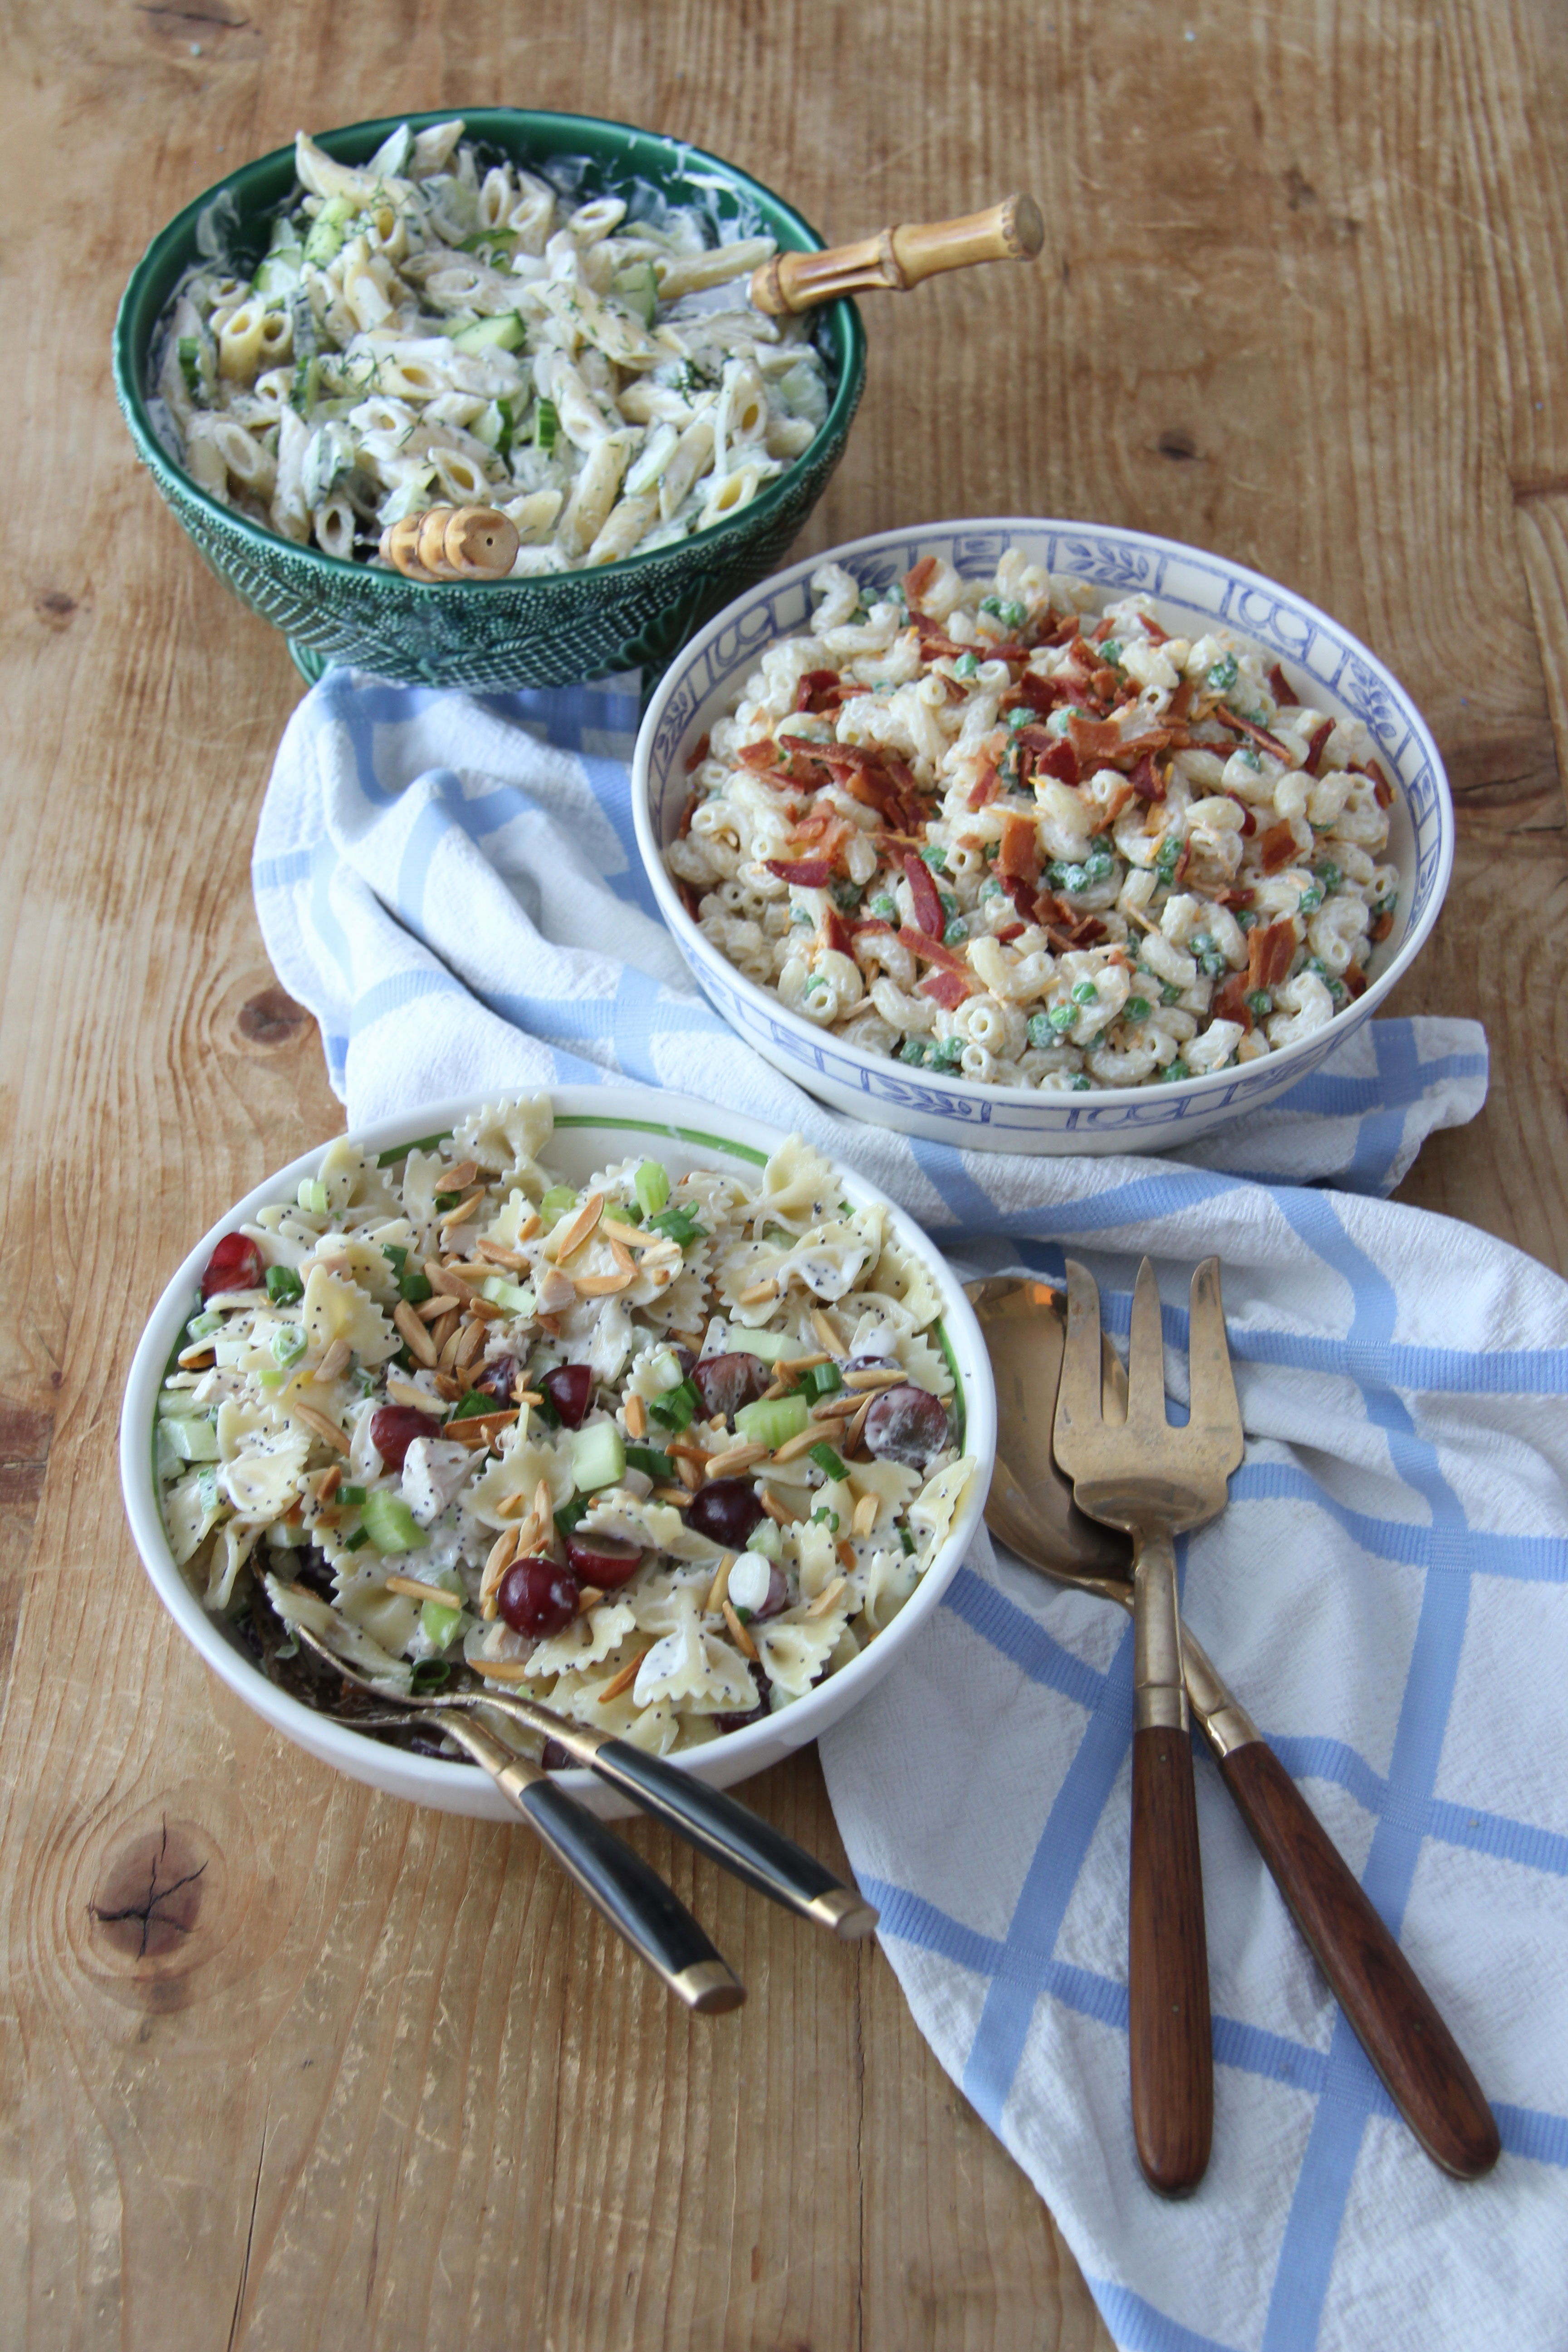 Make one of these 3 Pasta Salads for your next BBQ. Choose from Cucumber and Dill, Chicken Grape Pasta with Poppy Seed Dressing or Bacon Ranch Pasta. Yum!